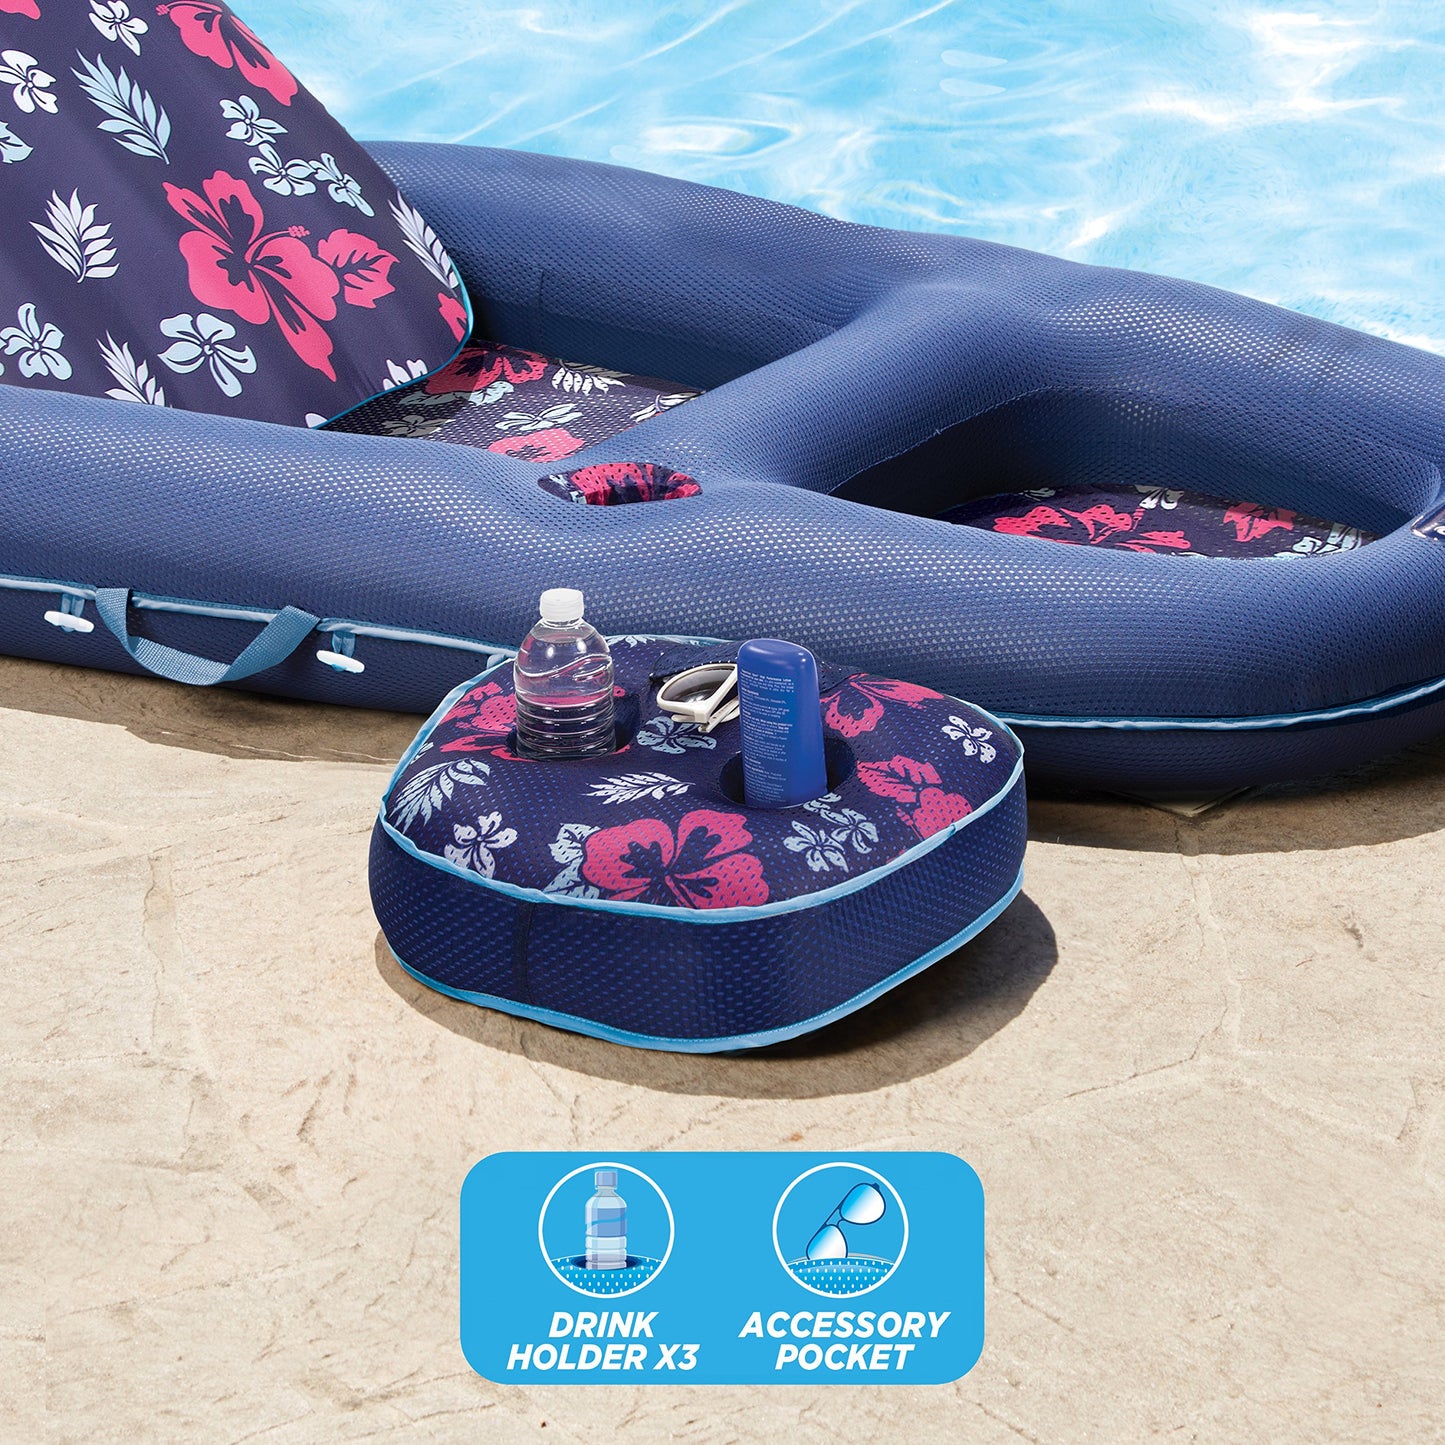 Aqua Oversized Ultimate Pool Lounger, Inflatable Pool Float with UPF 50 Sunshade Canopy, Heavy Duty, X-Large, Navy/Aqua/White Stripe Aqua Navy Campania 2-in-1 Recliner